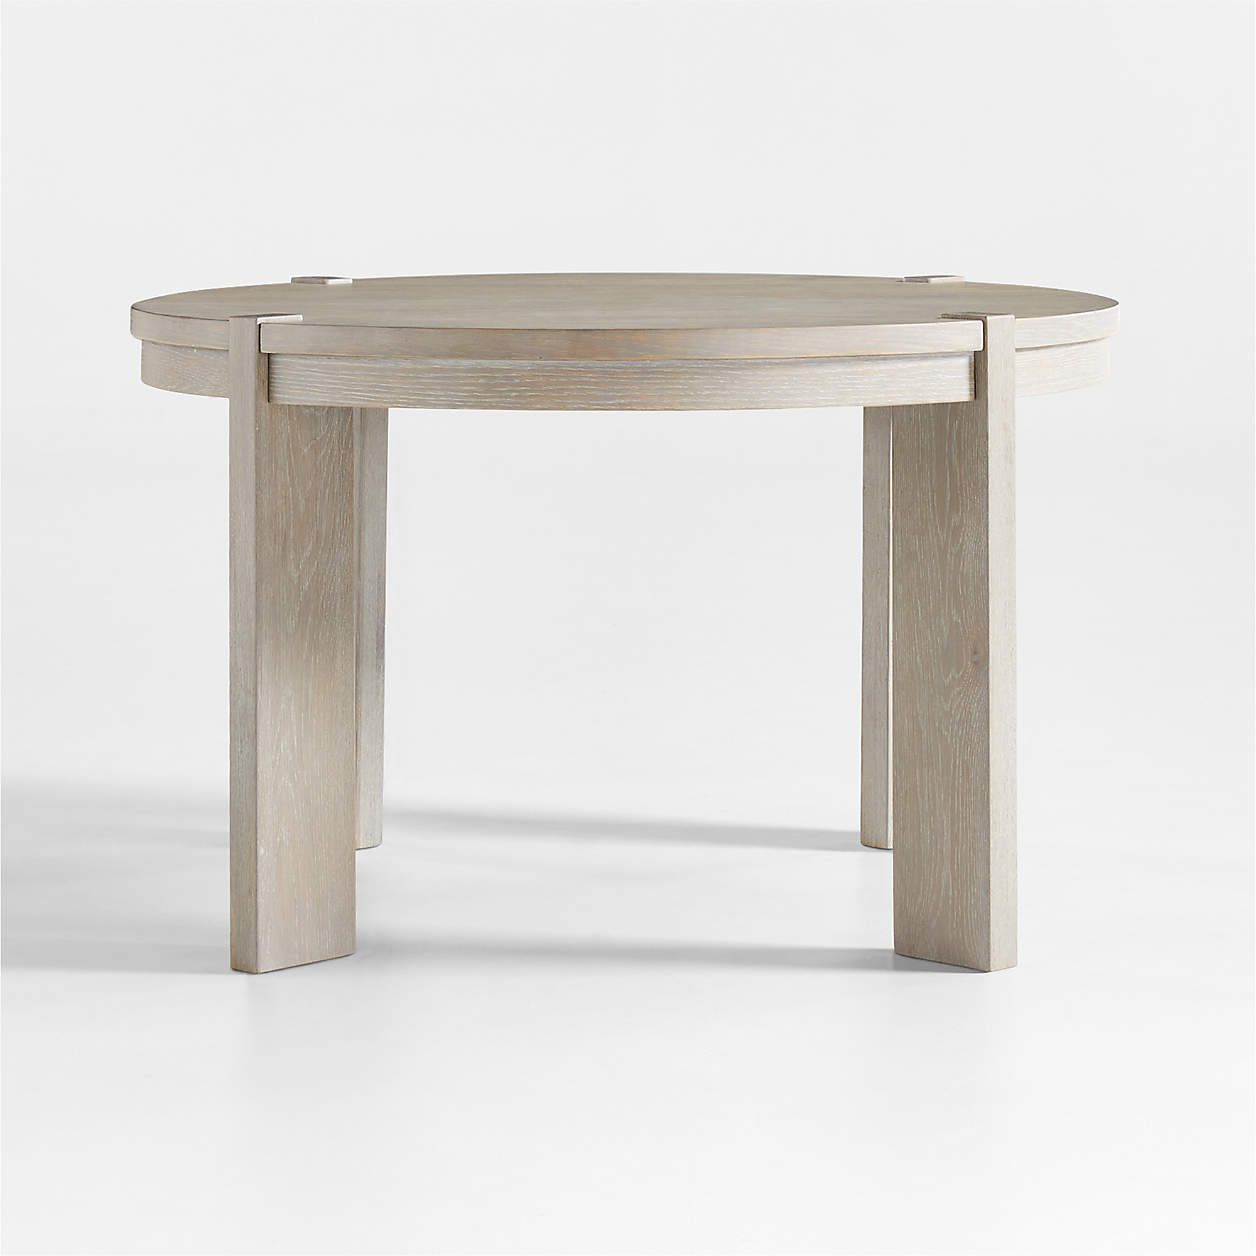 Diset Wood Oval Extendable Dining Table + Reviews | Crate & Barrel Canada